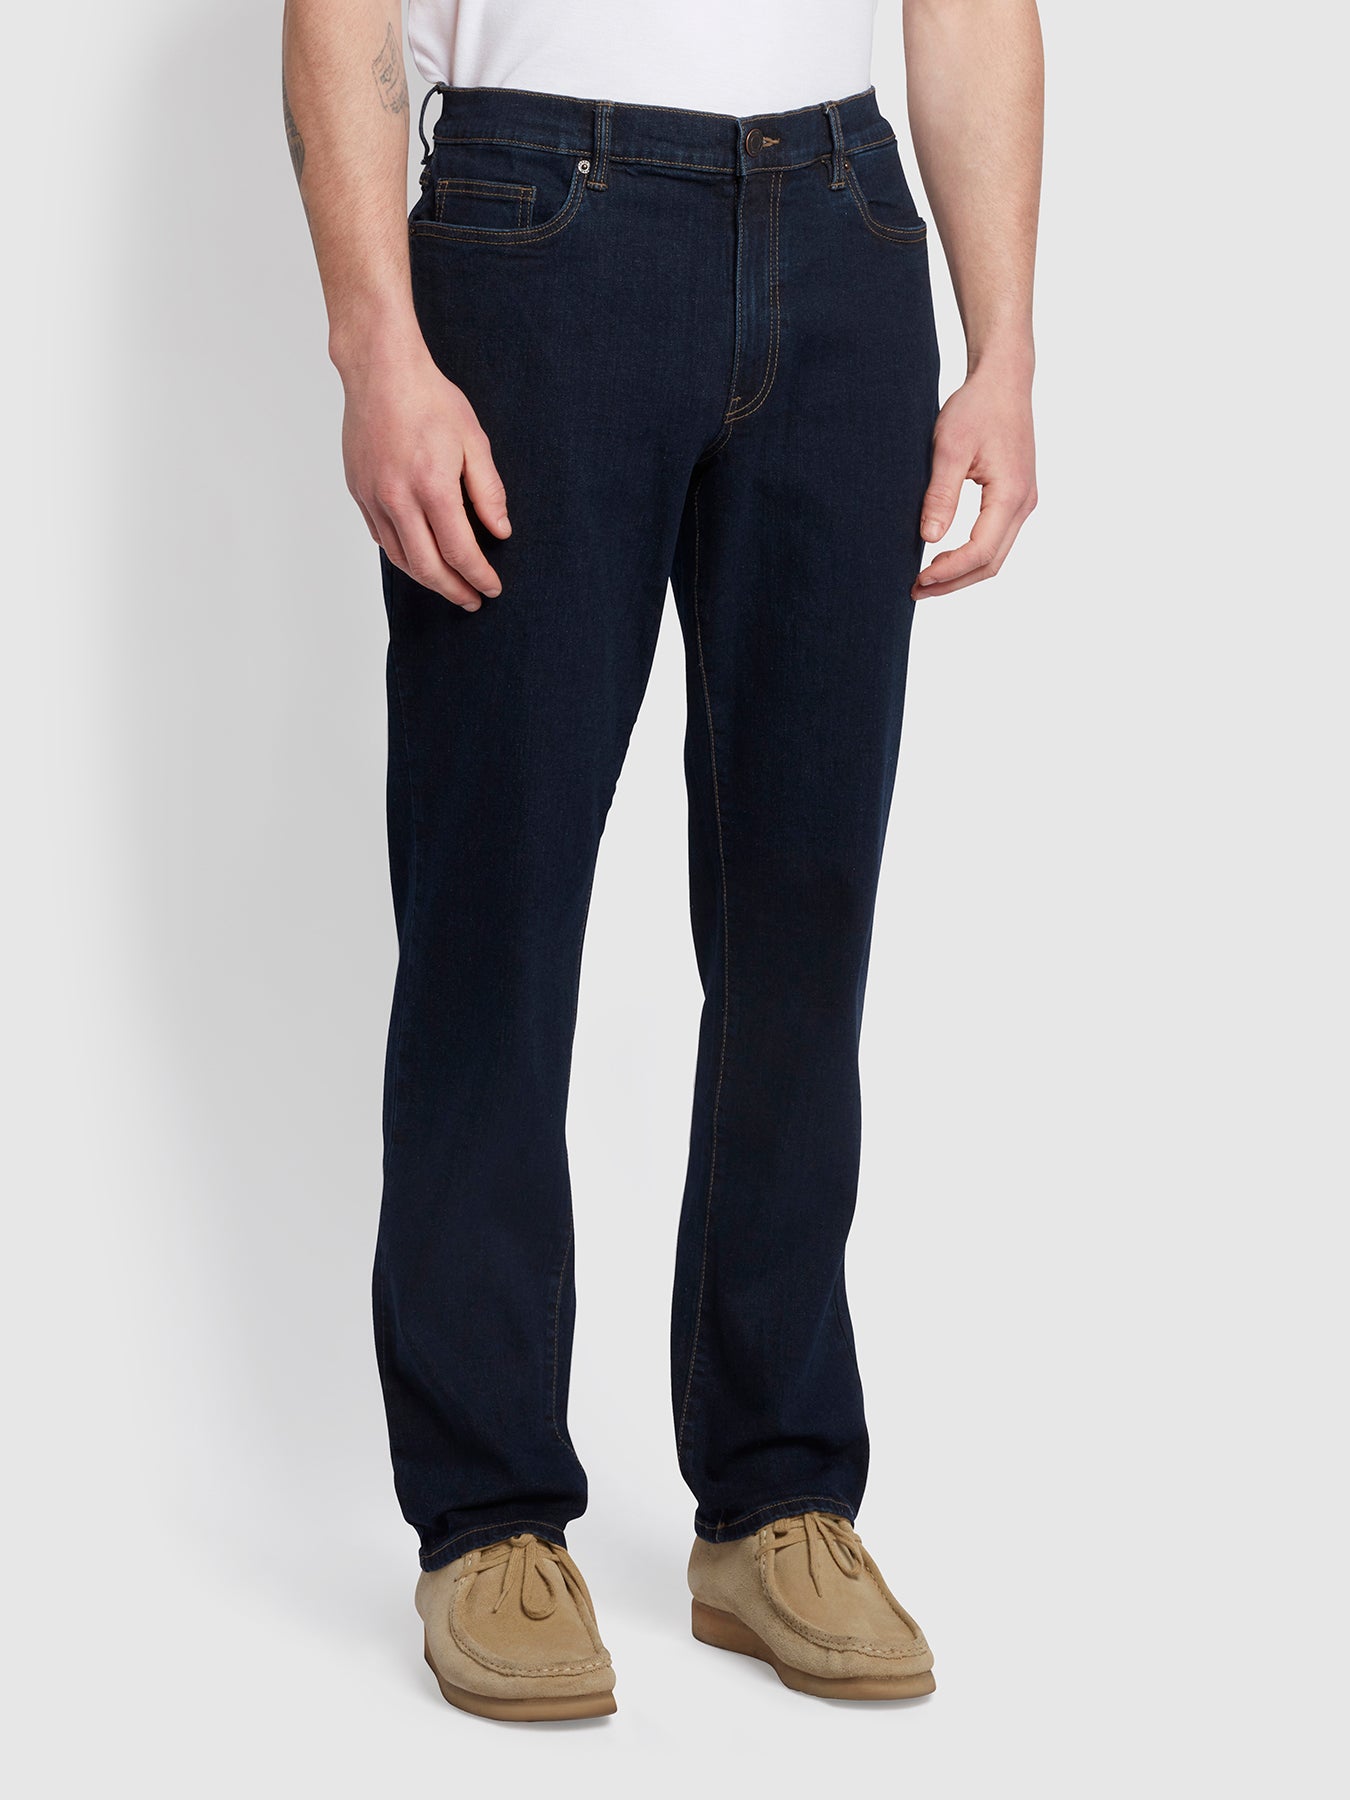 View Lawson Regular Fit Stretch Jeans In Rinse Denim information